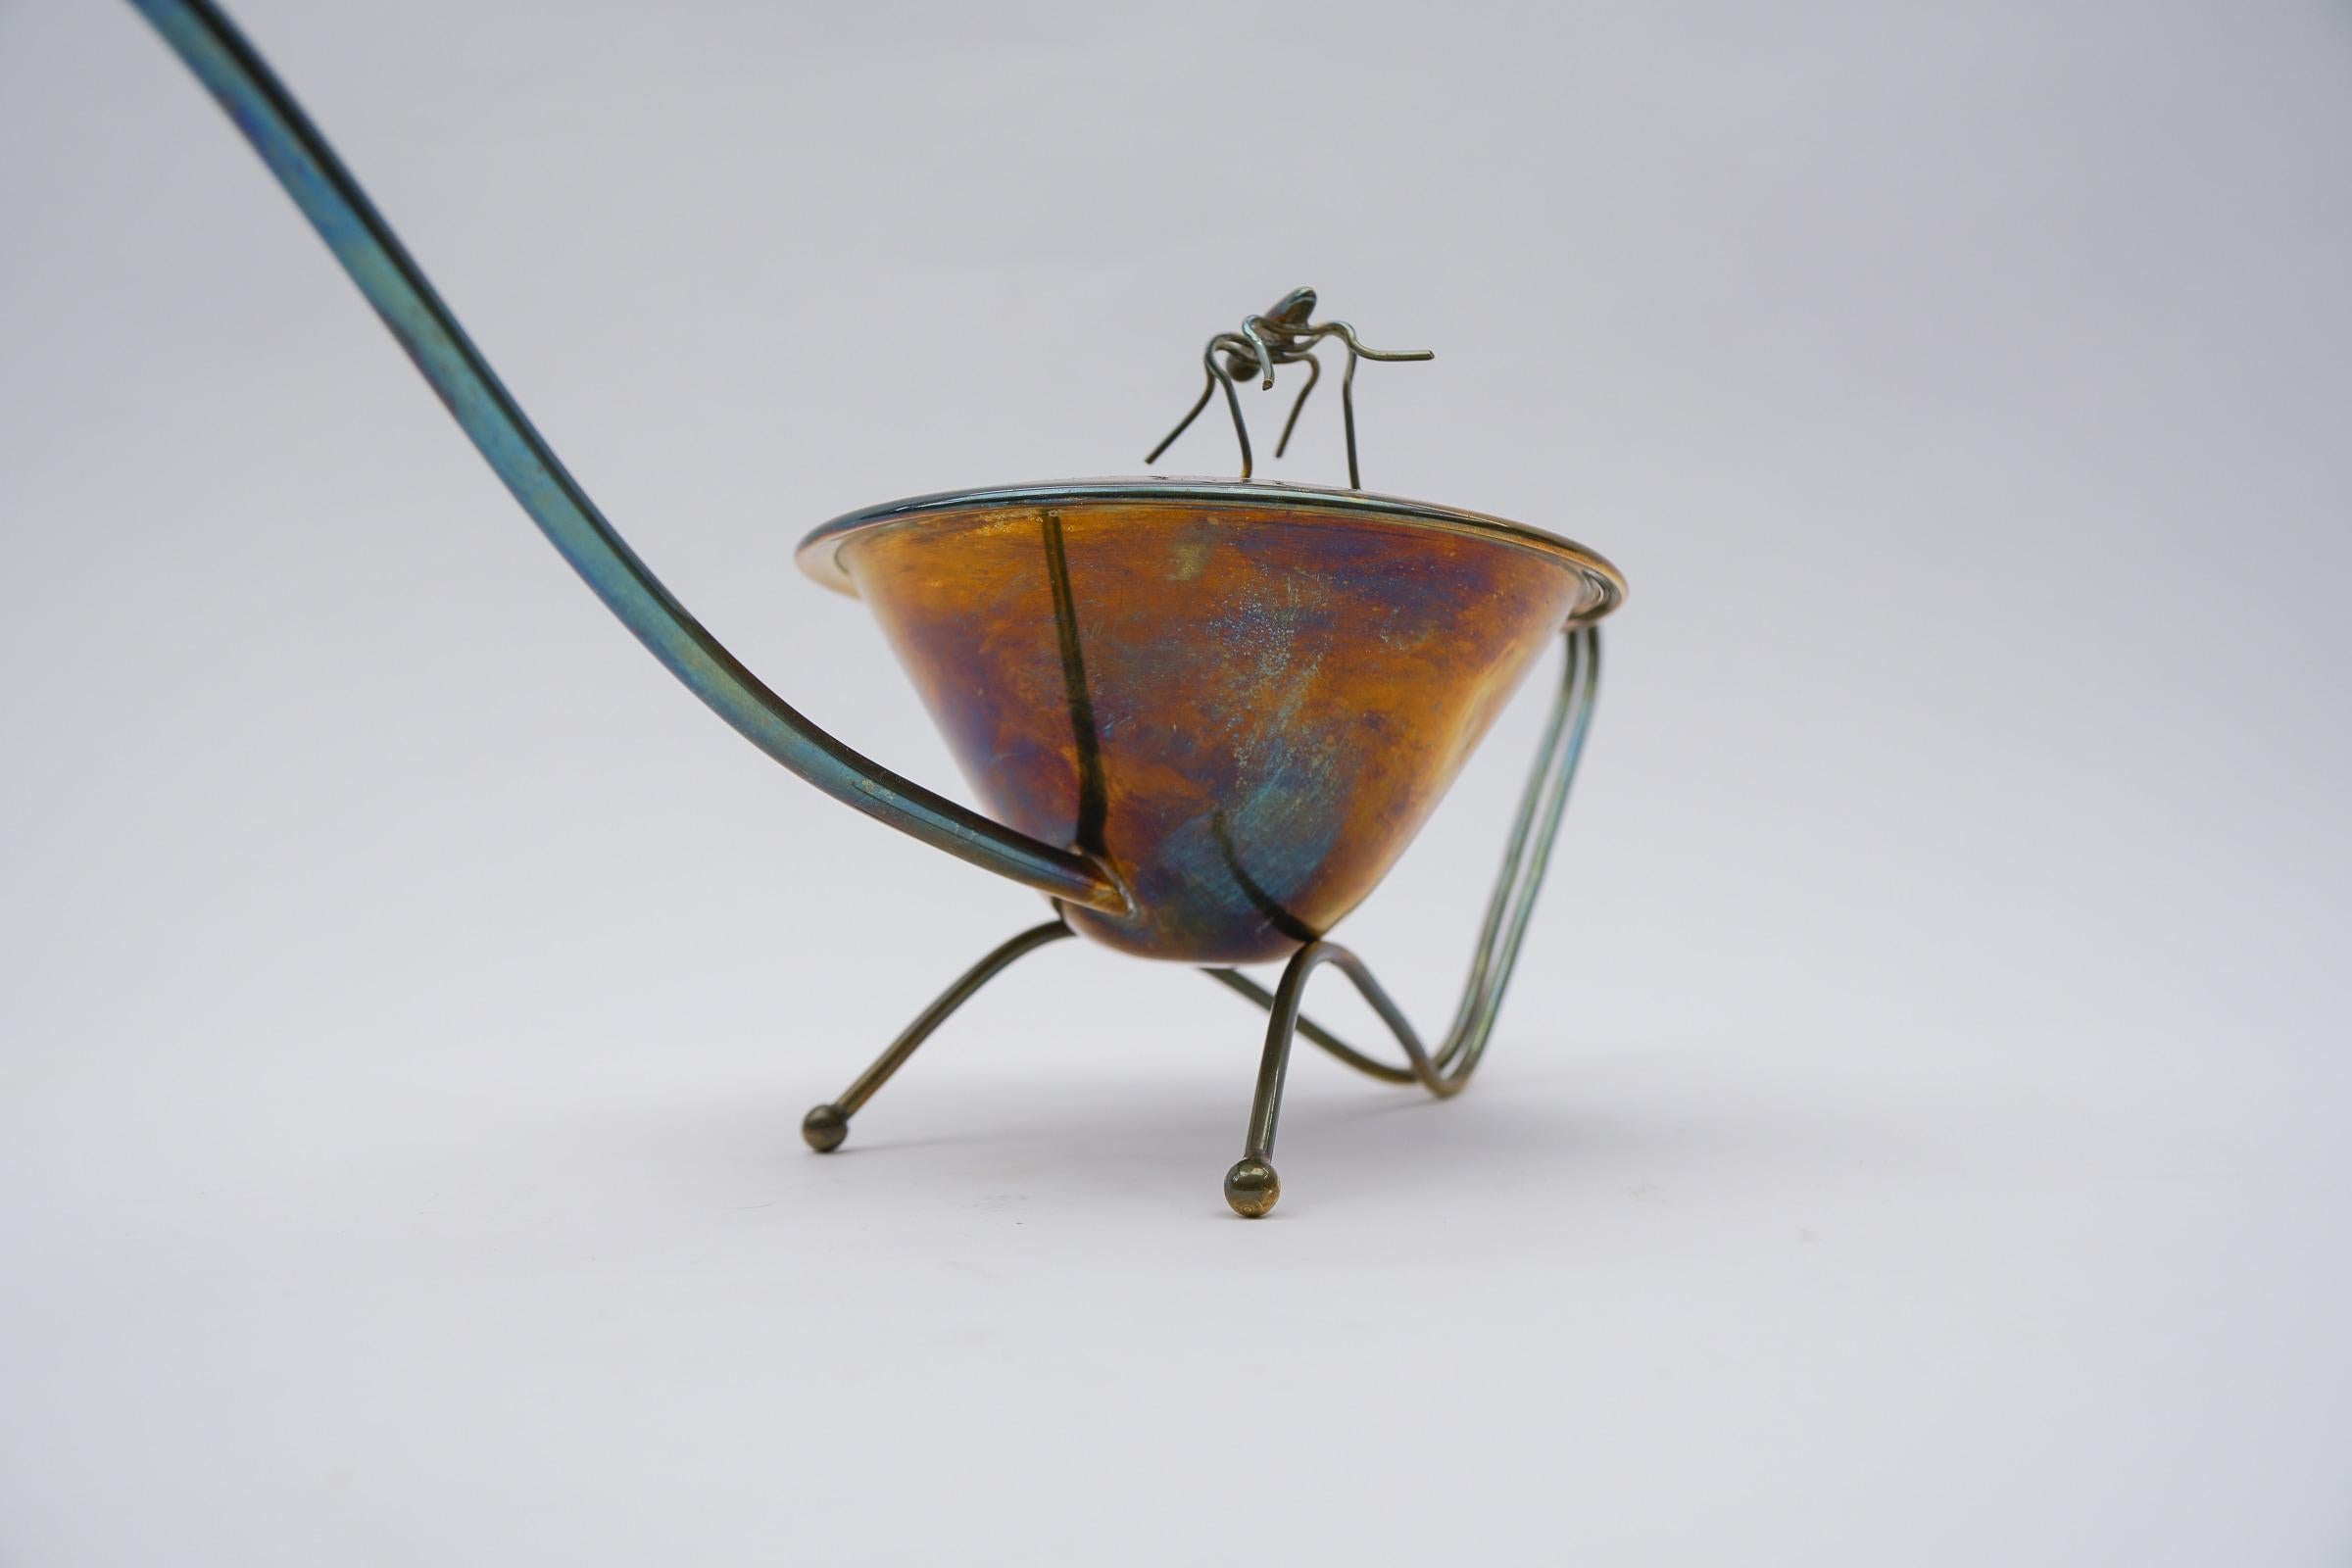 Mid-20th Century Very Rare Brass Watering Can with Movable Spider, 1950s, Austria For Sale